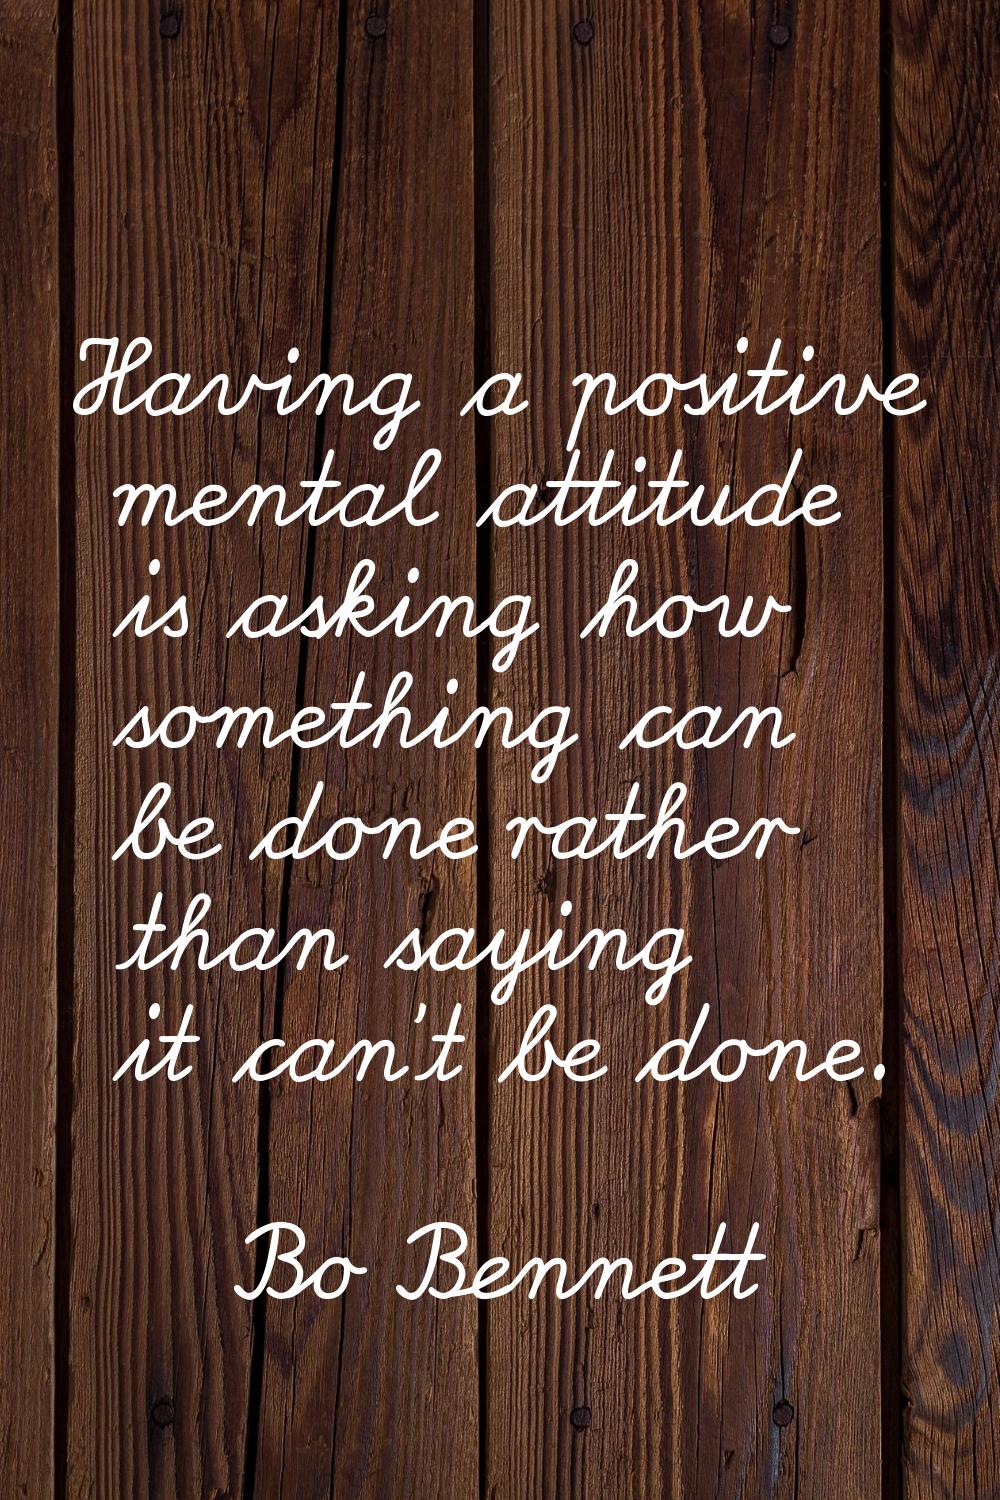 Having a positive mental attitude is asking how something can be done rather than saying it can't b